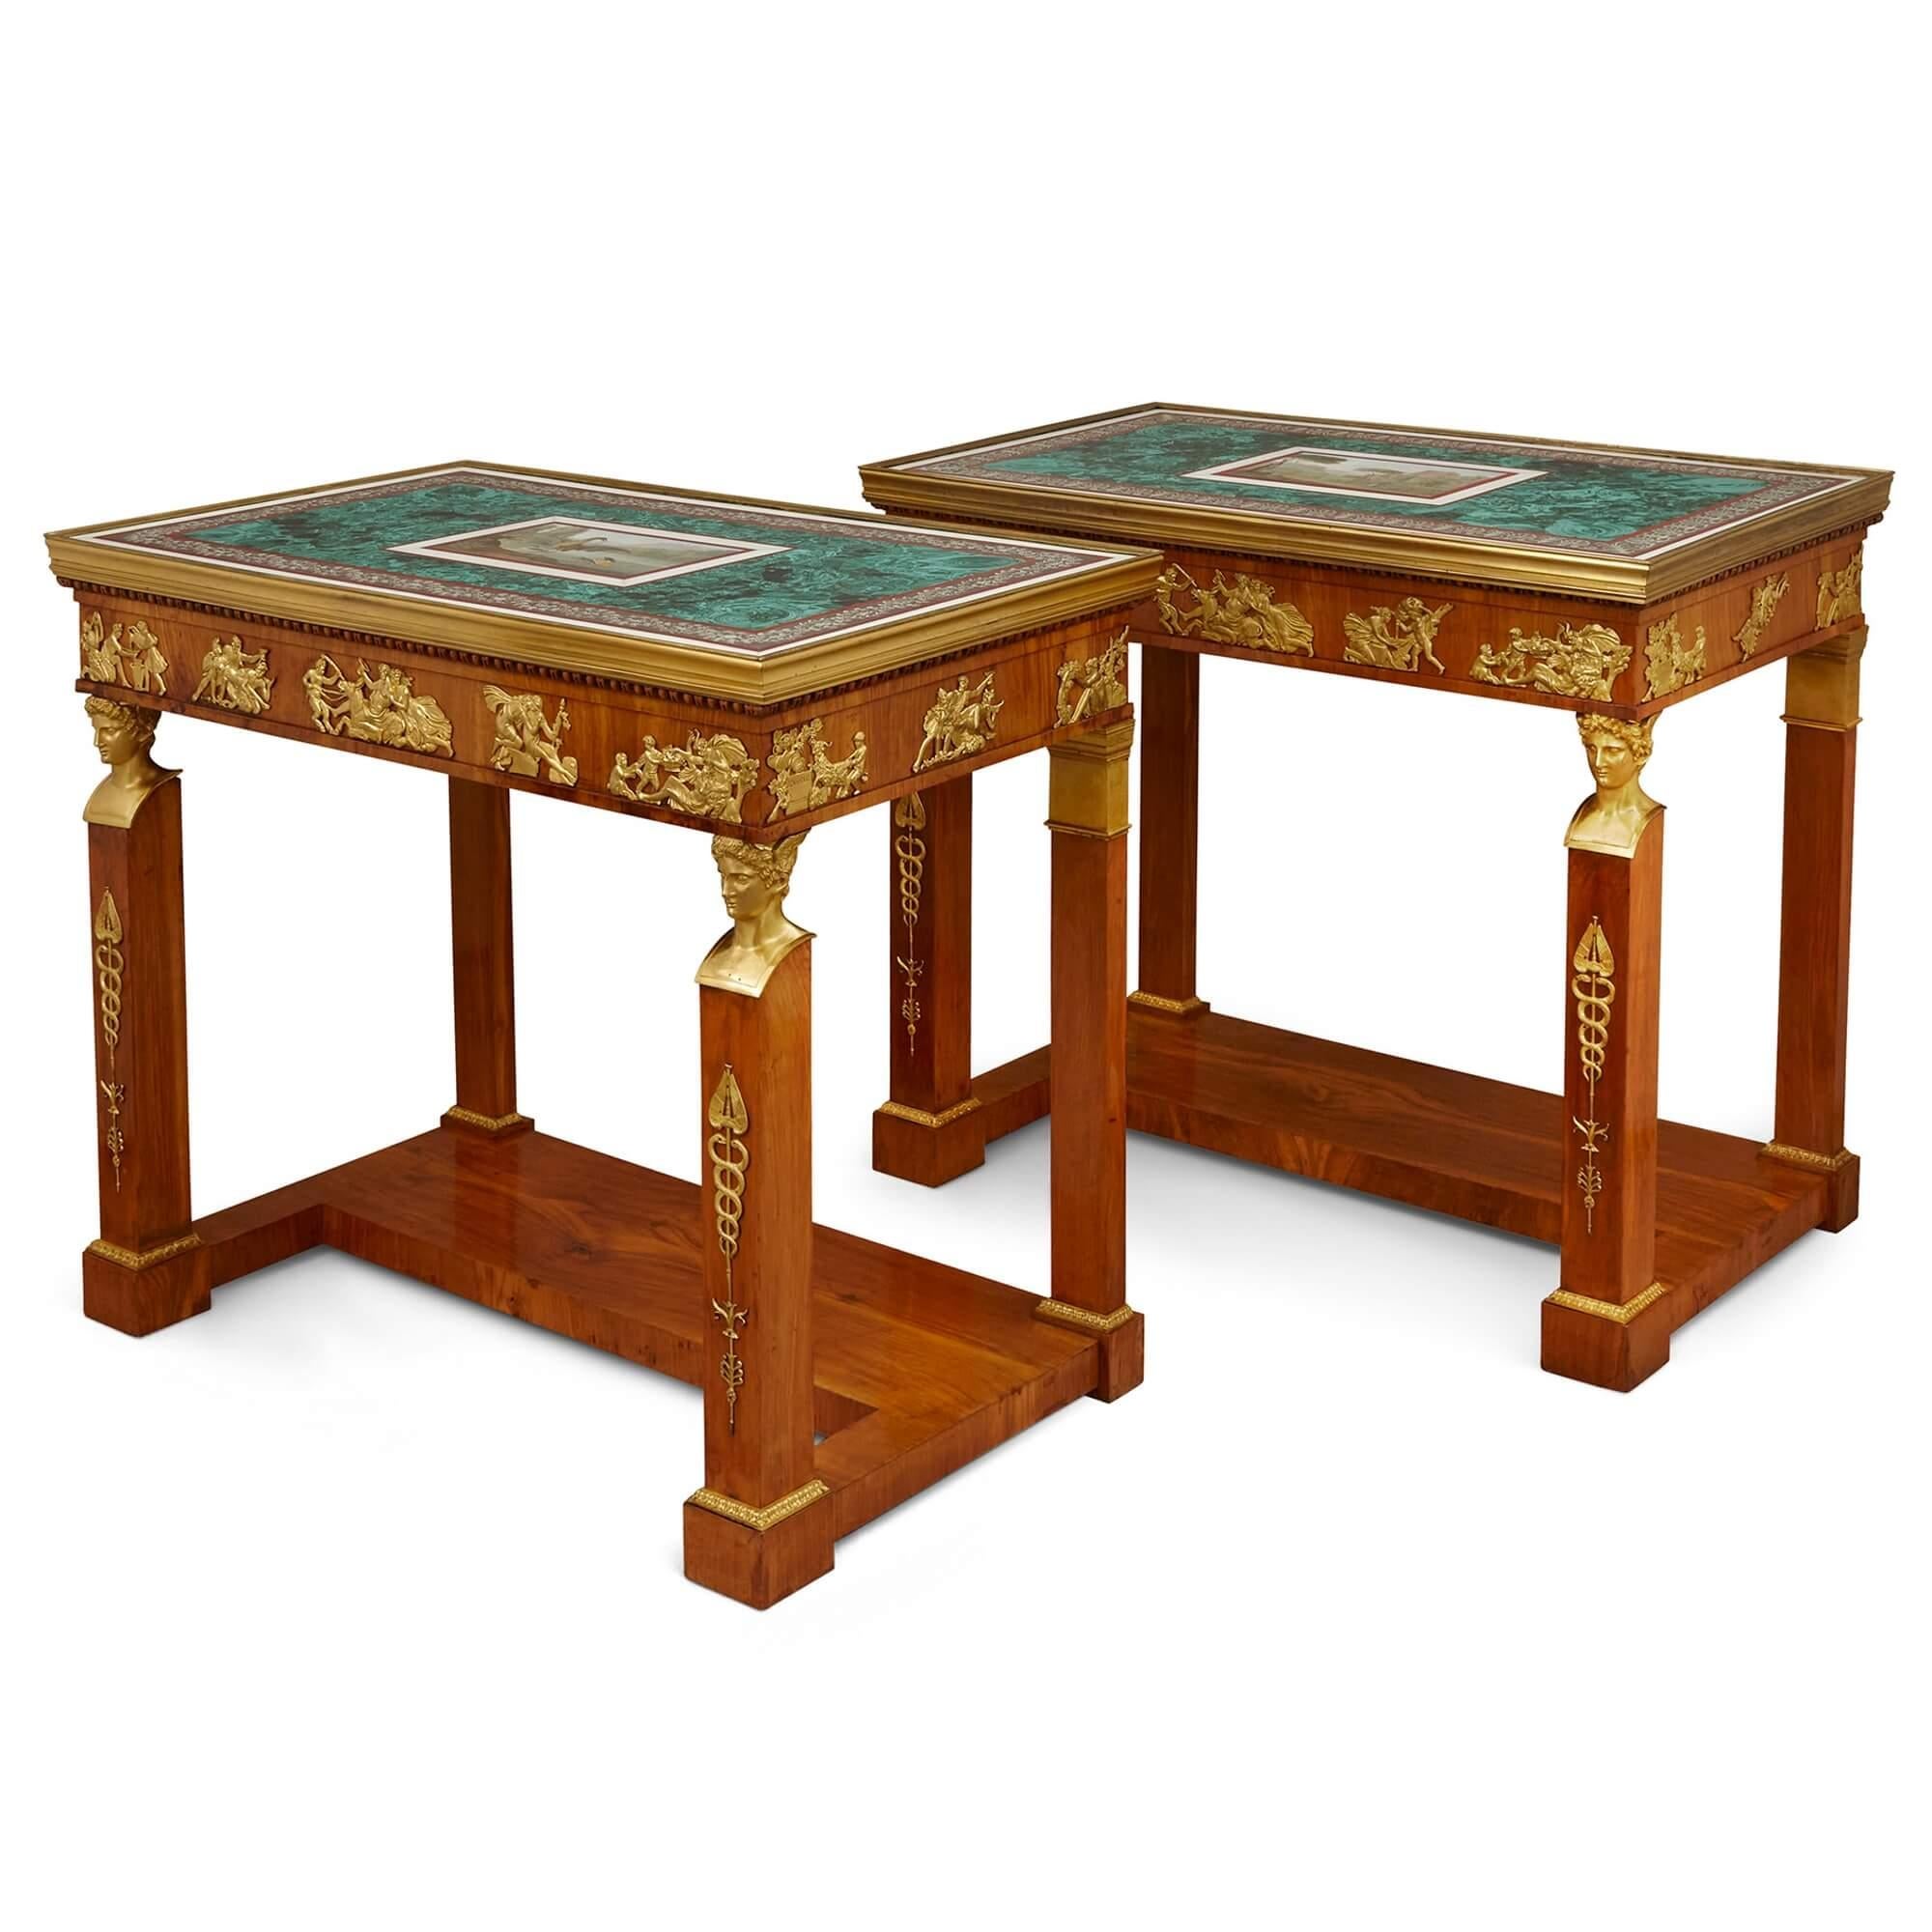 Important and very rare pair of micromosaic, malachite and walnut console tables
Italian & Russian, early 19th century
Measures: Height 89cm, width 106.5cm, depth 62cm

These exceptionally beautiful antique console tables in walnut, malachite,